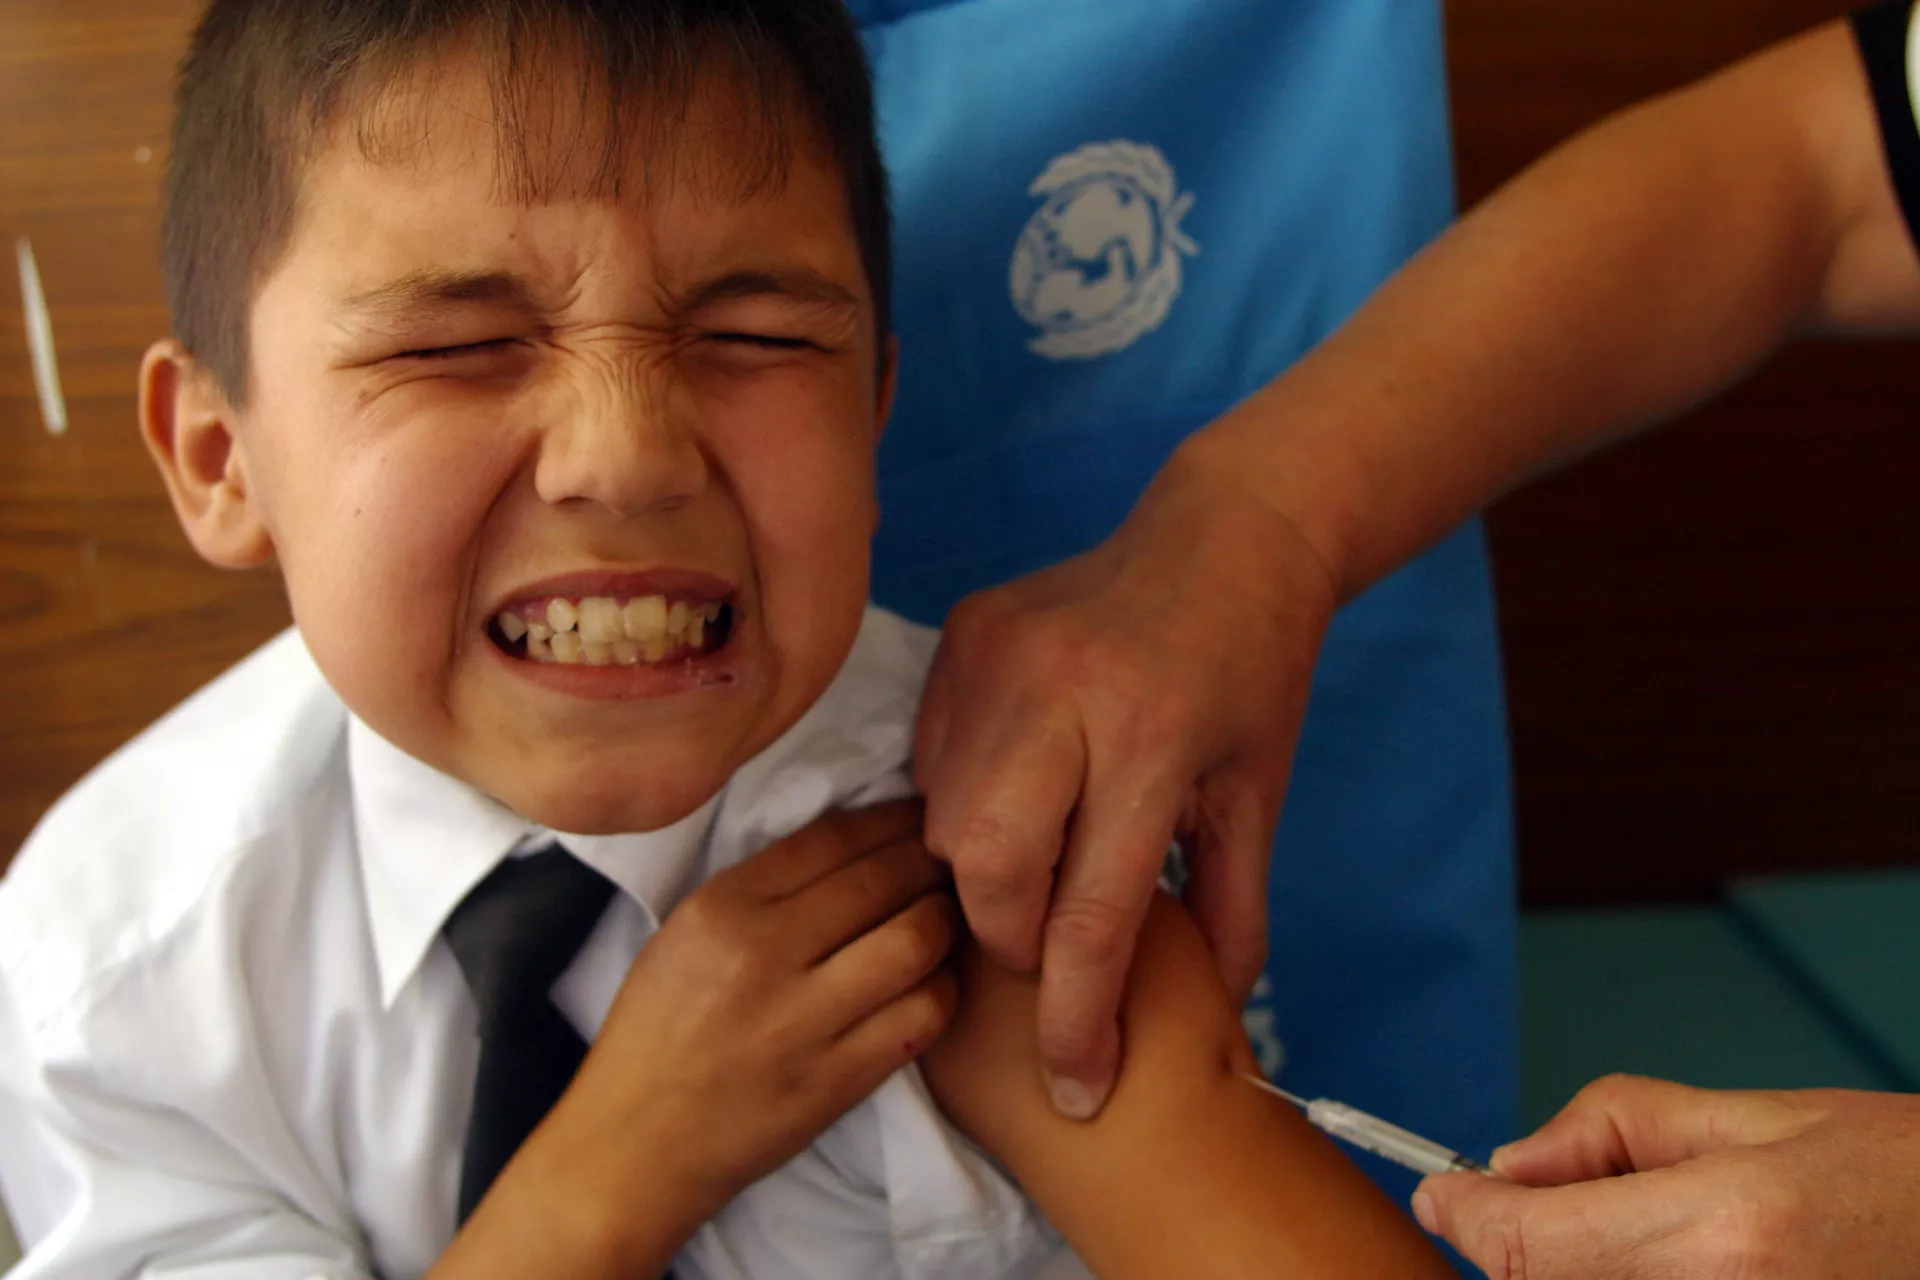 10-year-old boy is vaccinated during a national immunization campaign in Dushanbe, Tajikistan.